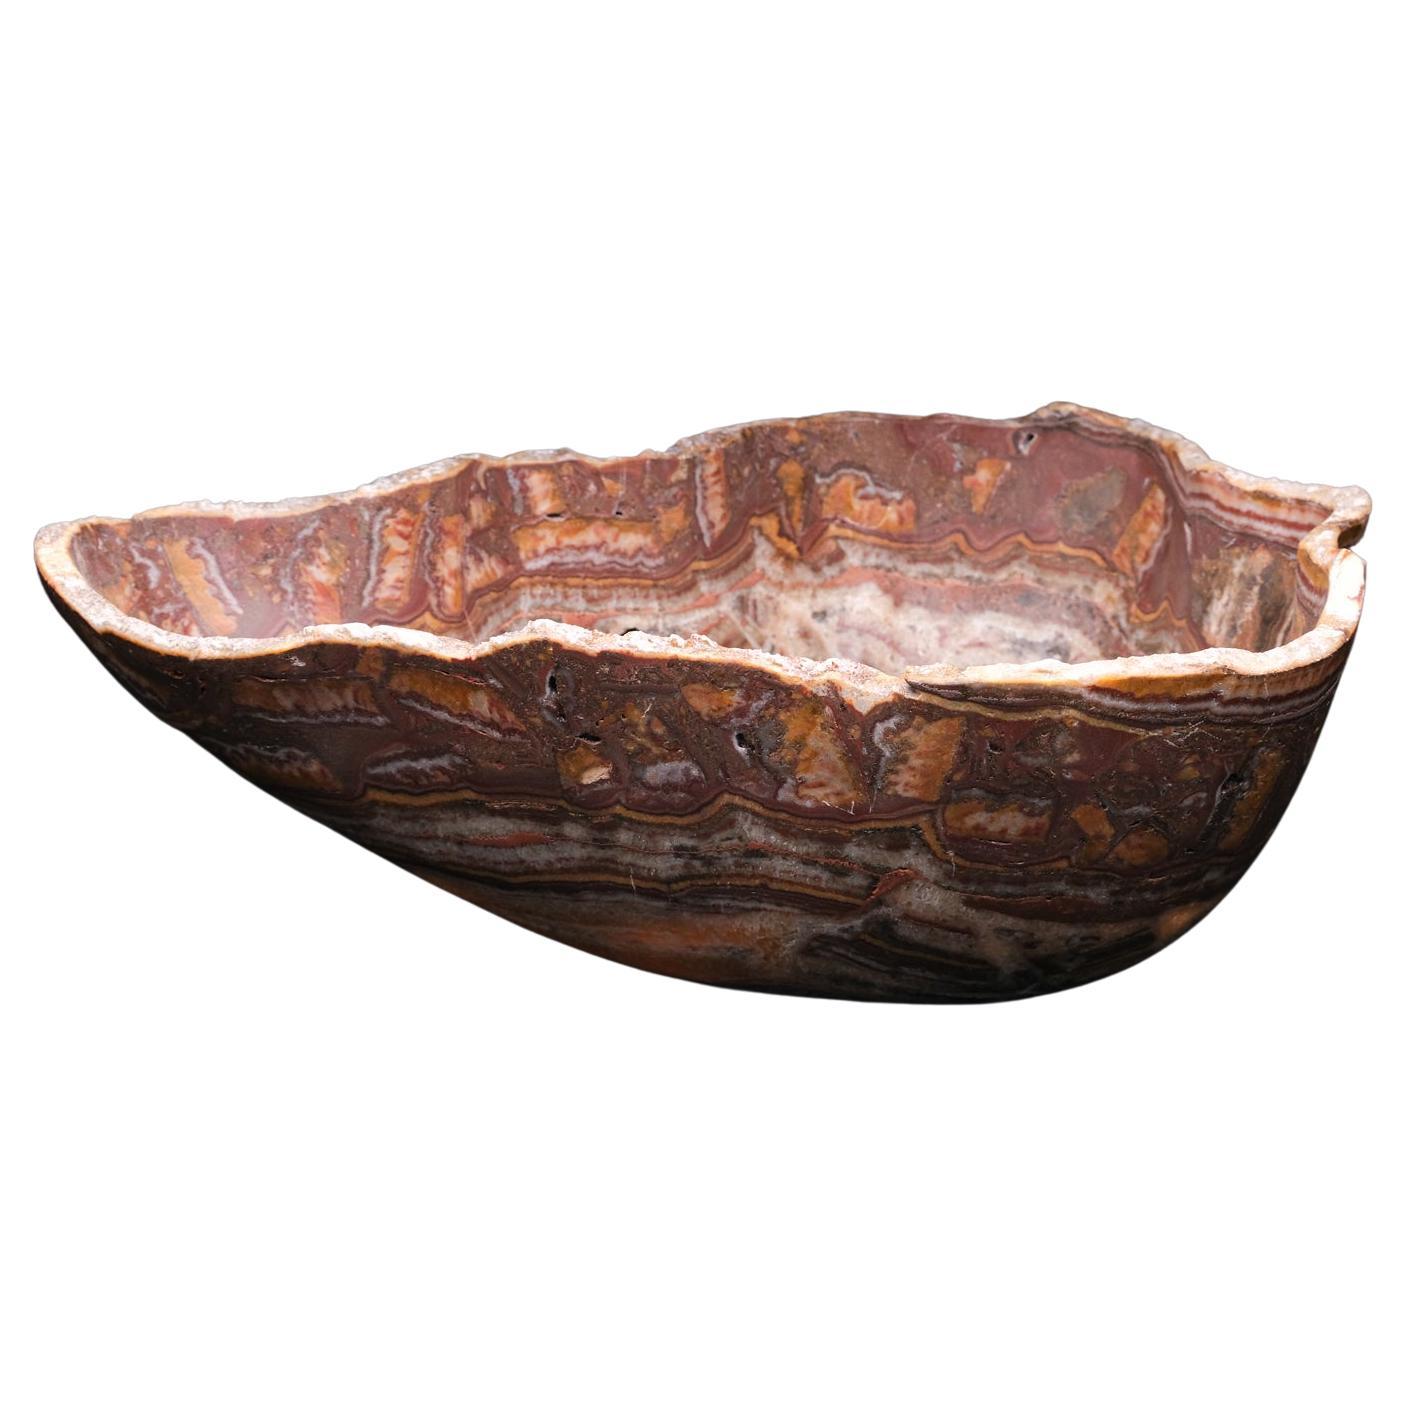  Polished Onyx Bowl from Mexico (14.4 Lbs) For Sale